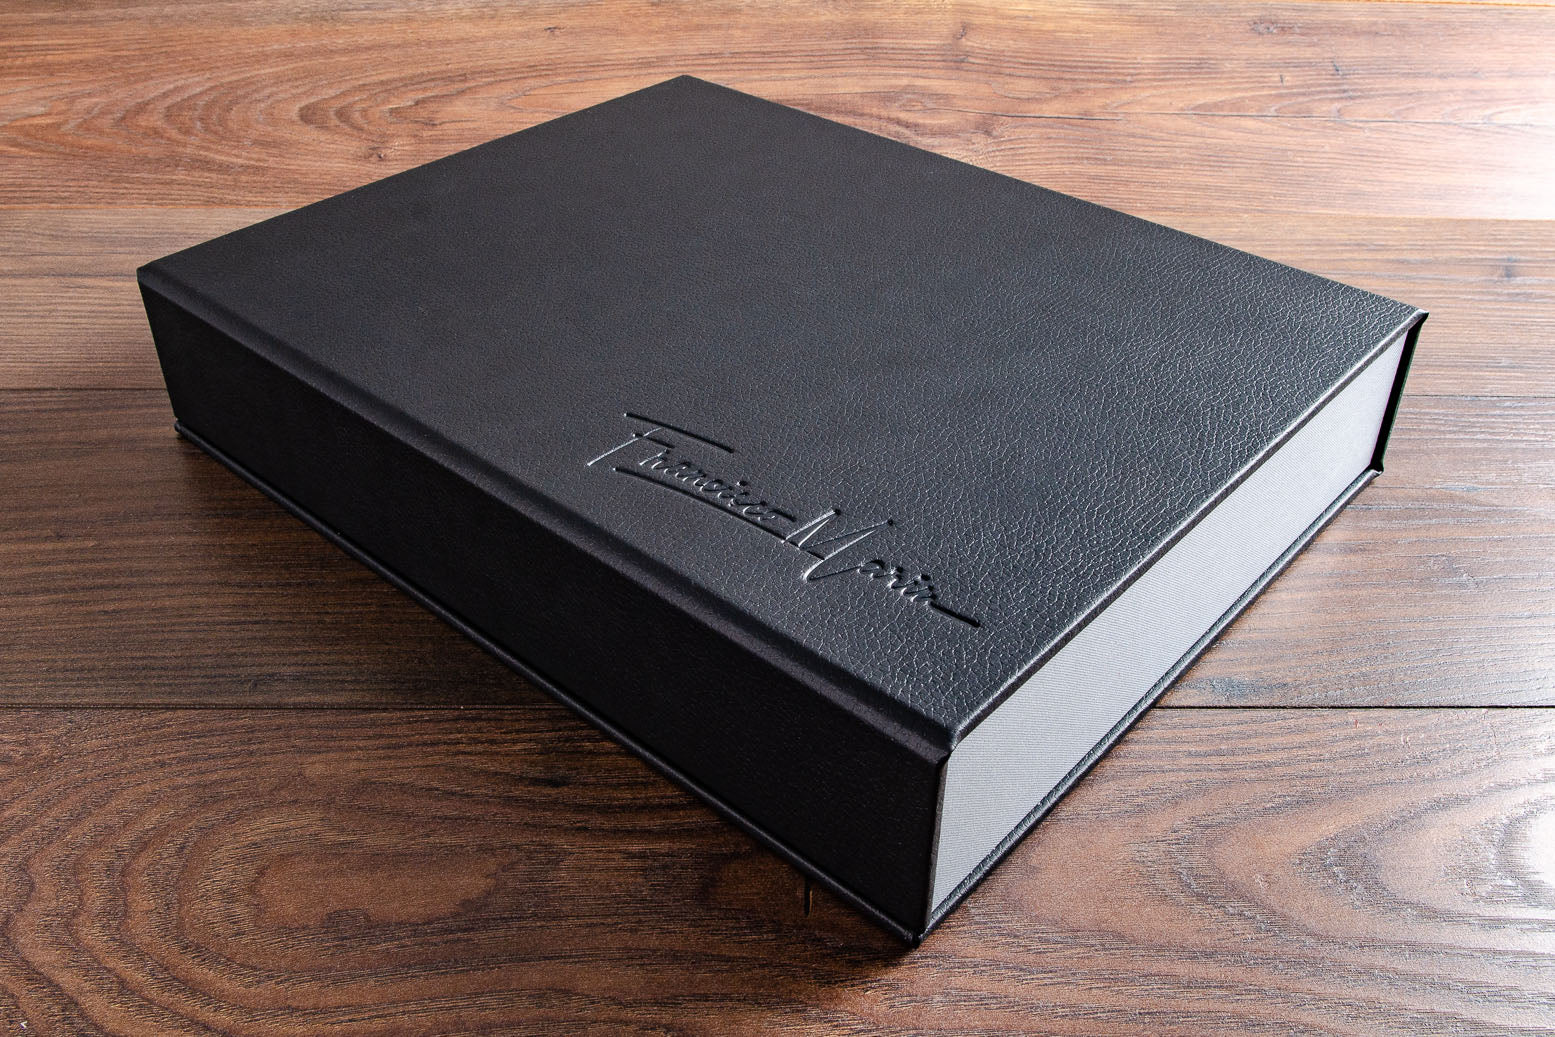 Photographers A4 Portfolio Box. Product is H&Co drop back clamshell box covered in black faux leather personalised with blind embossed stamping